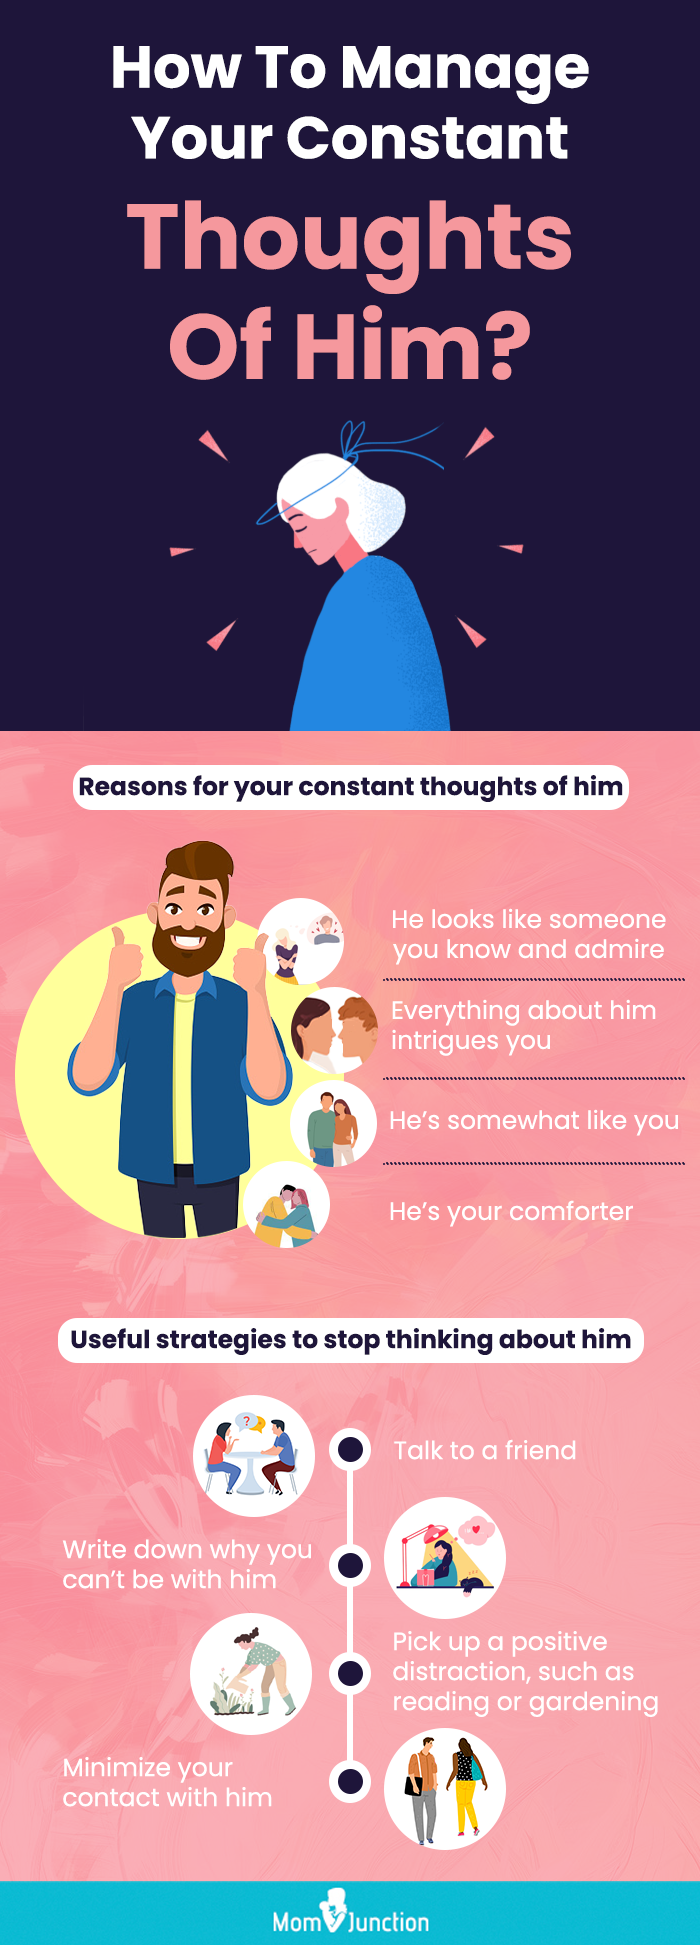 how to manage your constant thoughts of him [infographic]